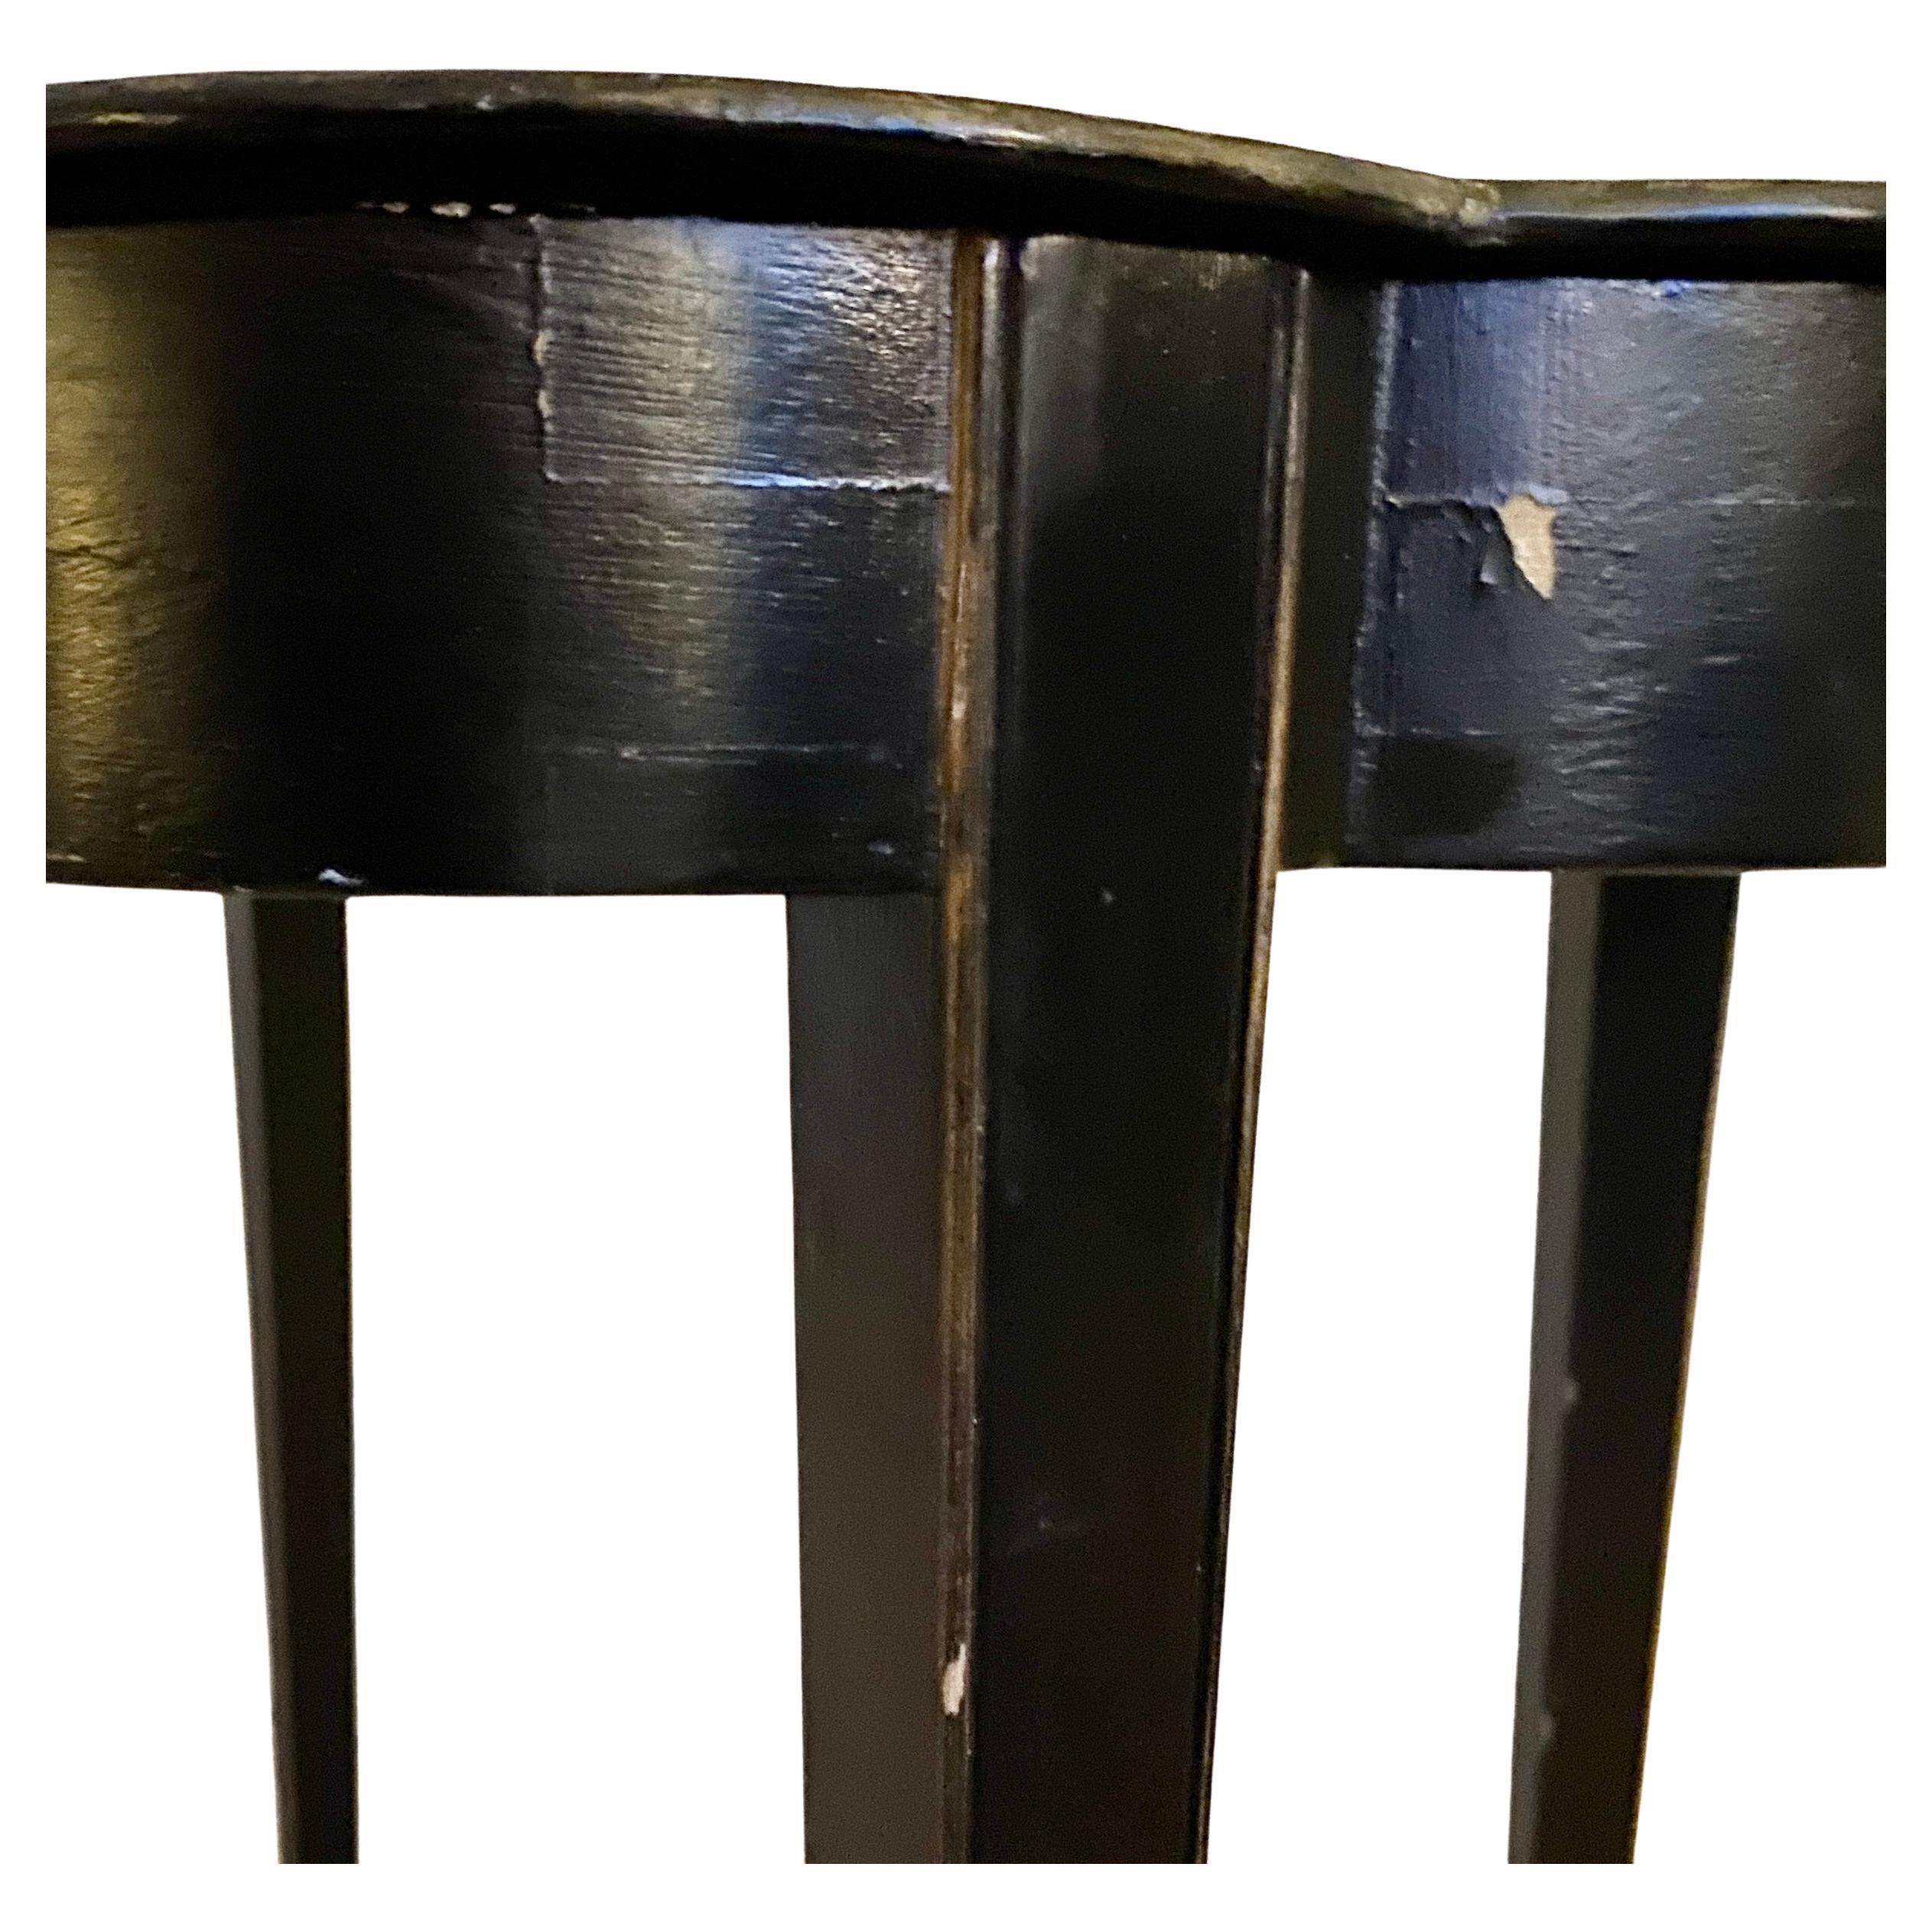 Metal Danish Black-Painted Flower Decorated Coffee Tray Table, circa 1920s For Sale